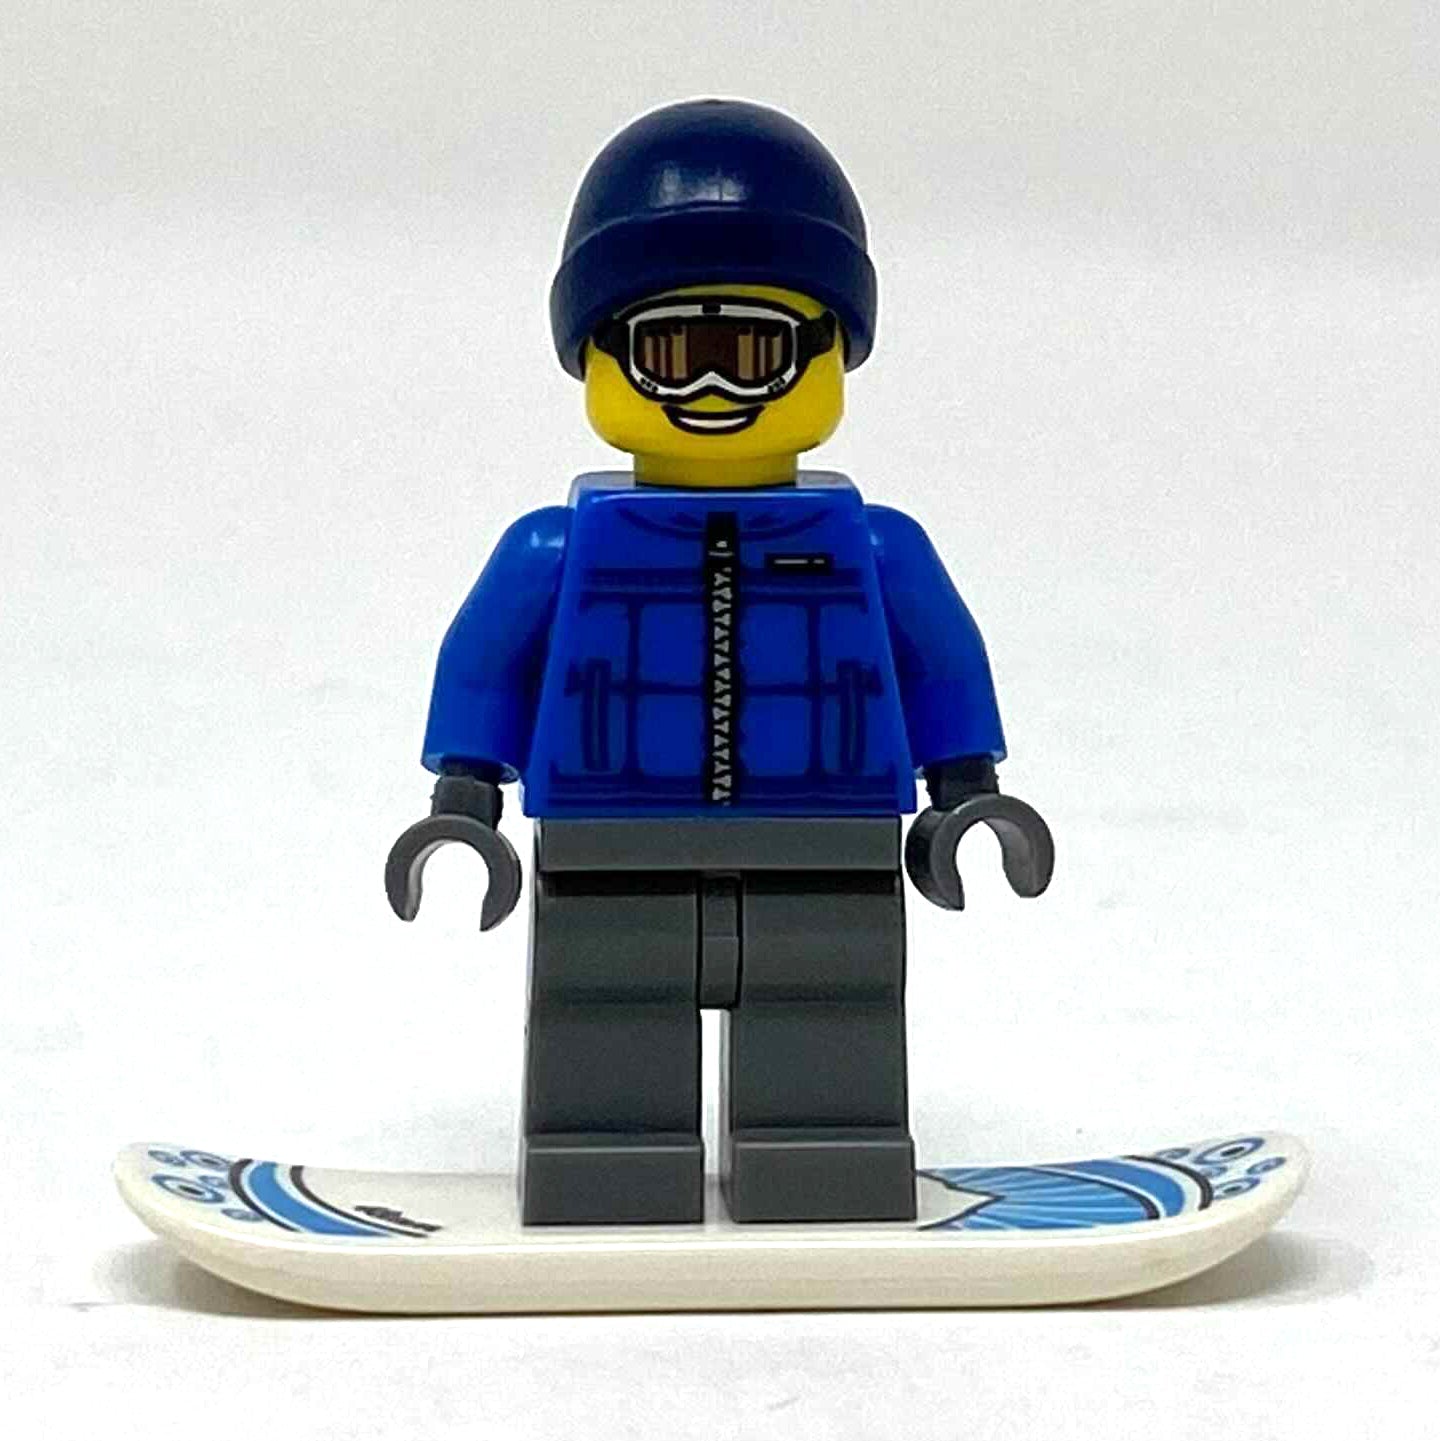 S5 Snowboarder Guy - Series 5 Minifigure (col080)